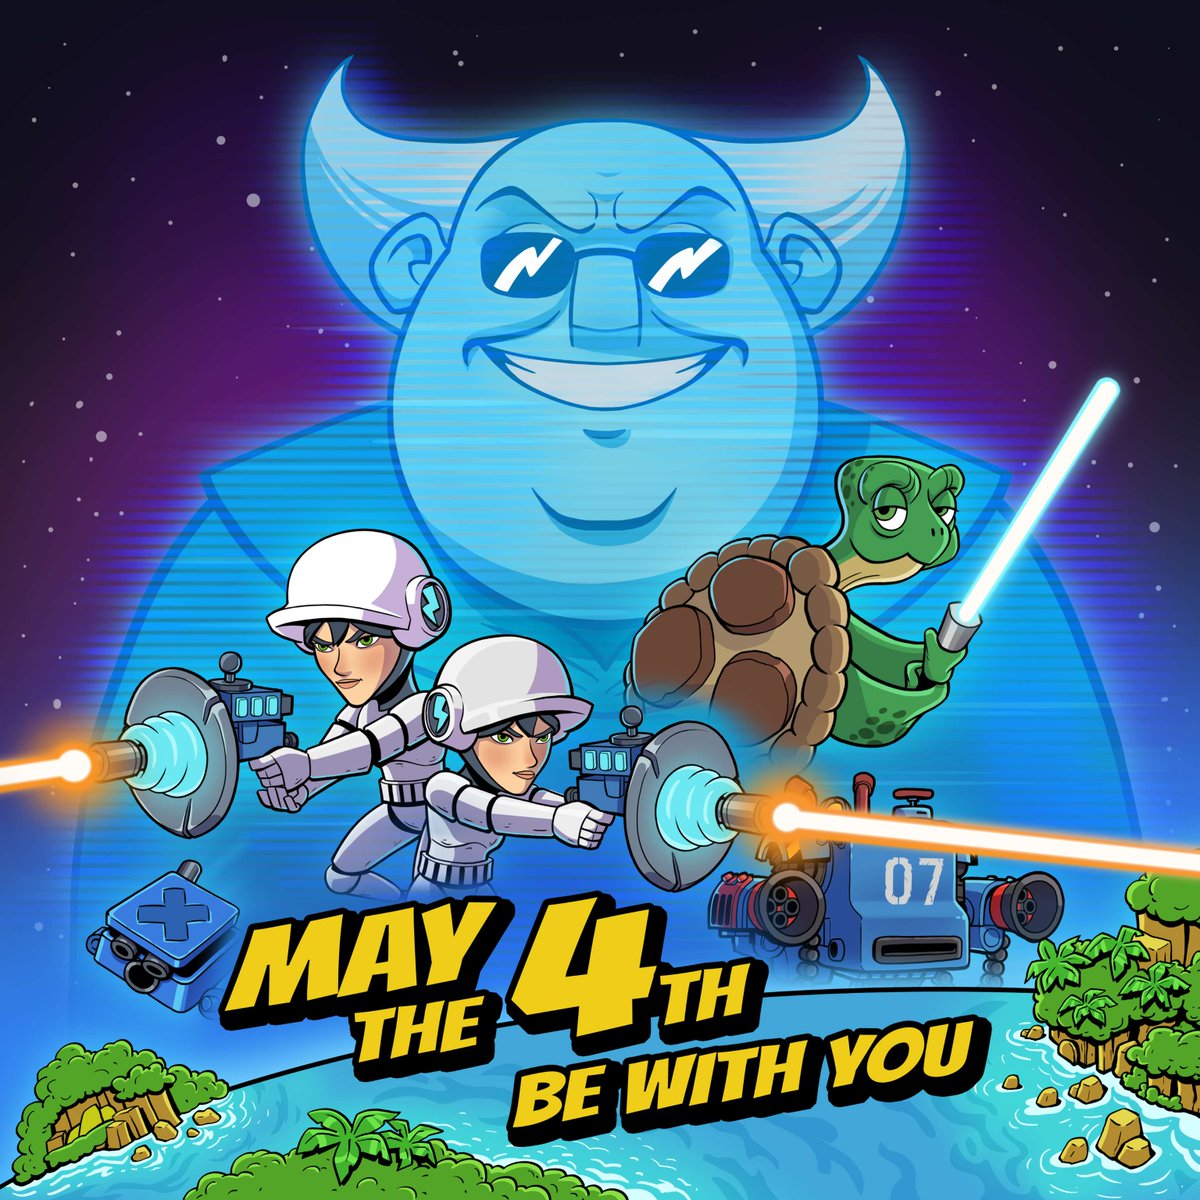 As you lead your troops into battle, remember: 'Do or do not. There is no try!'

#MayThe4th #BoomBeach #forfun